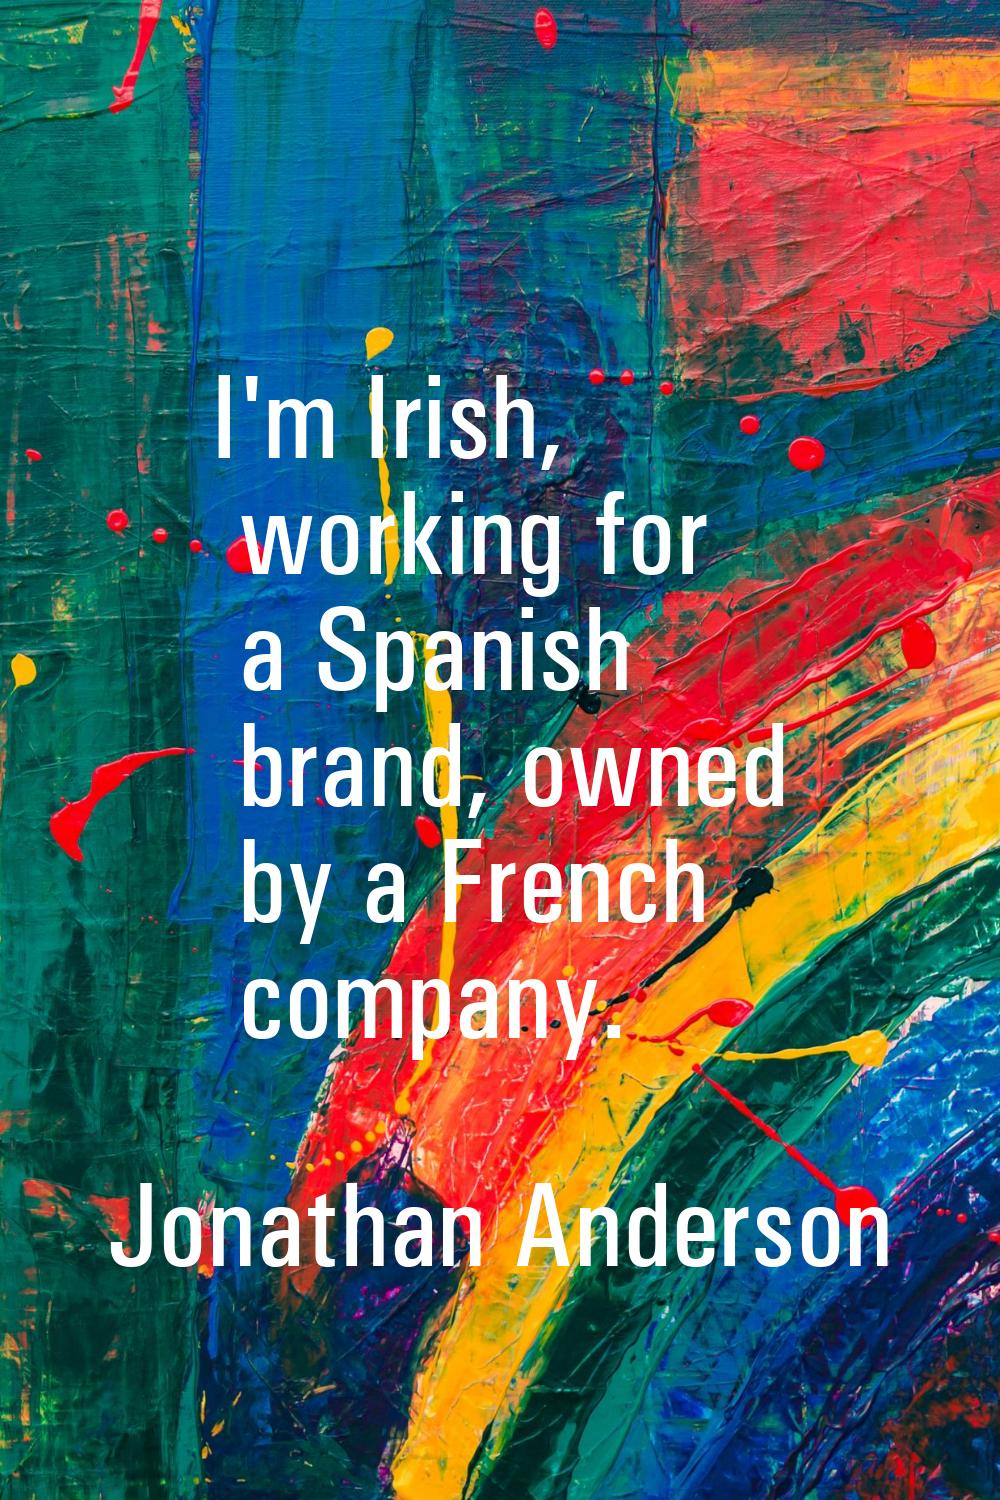 I'm Irish, working for a Spanish brand, owned by a French company.